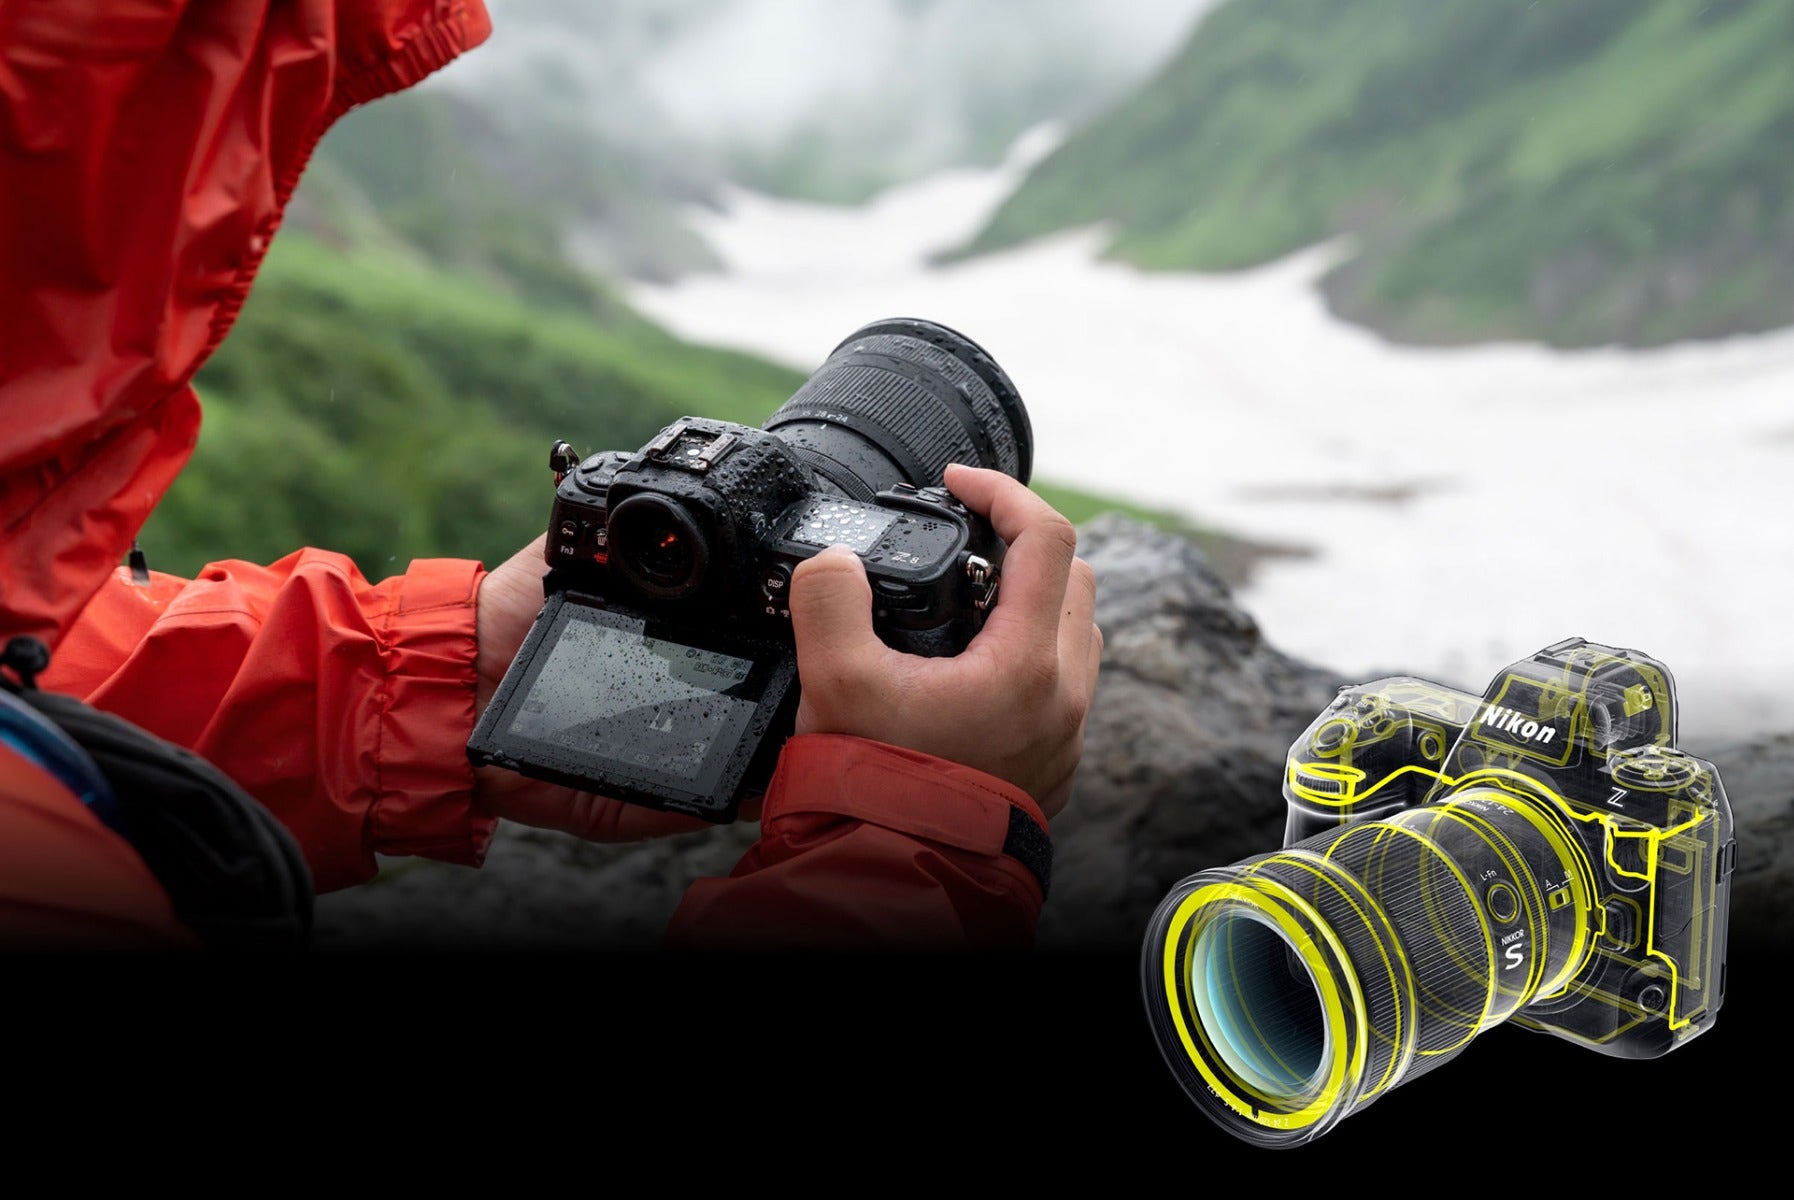 Durable. Made to Last. | Nikon Cameras, Lenses & Accessories